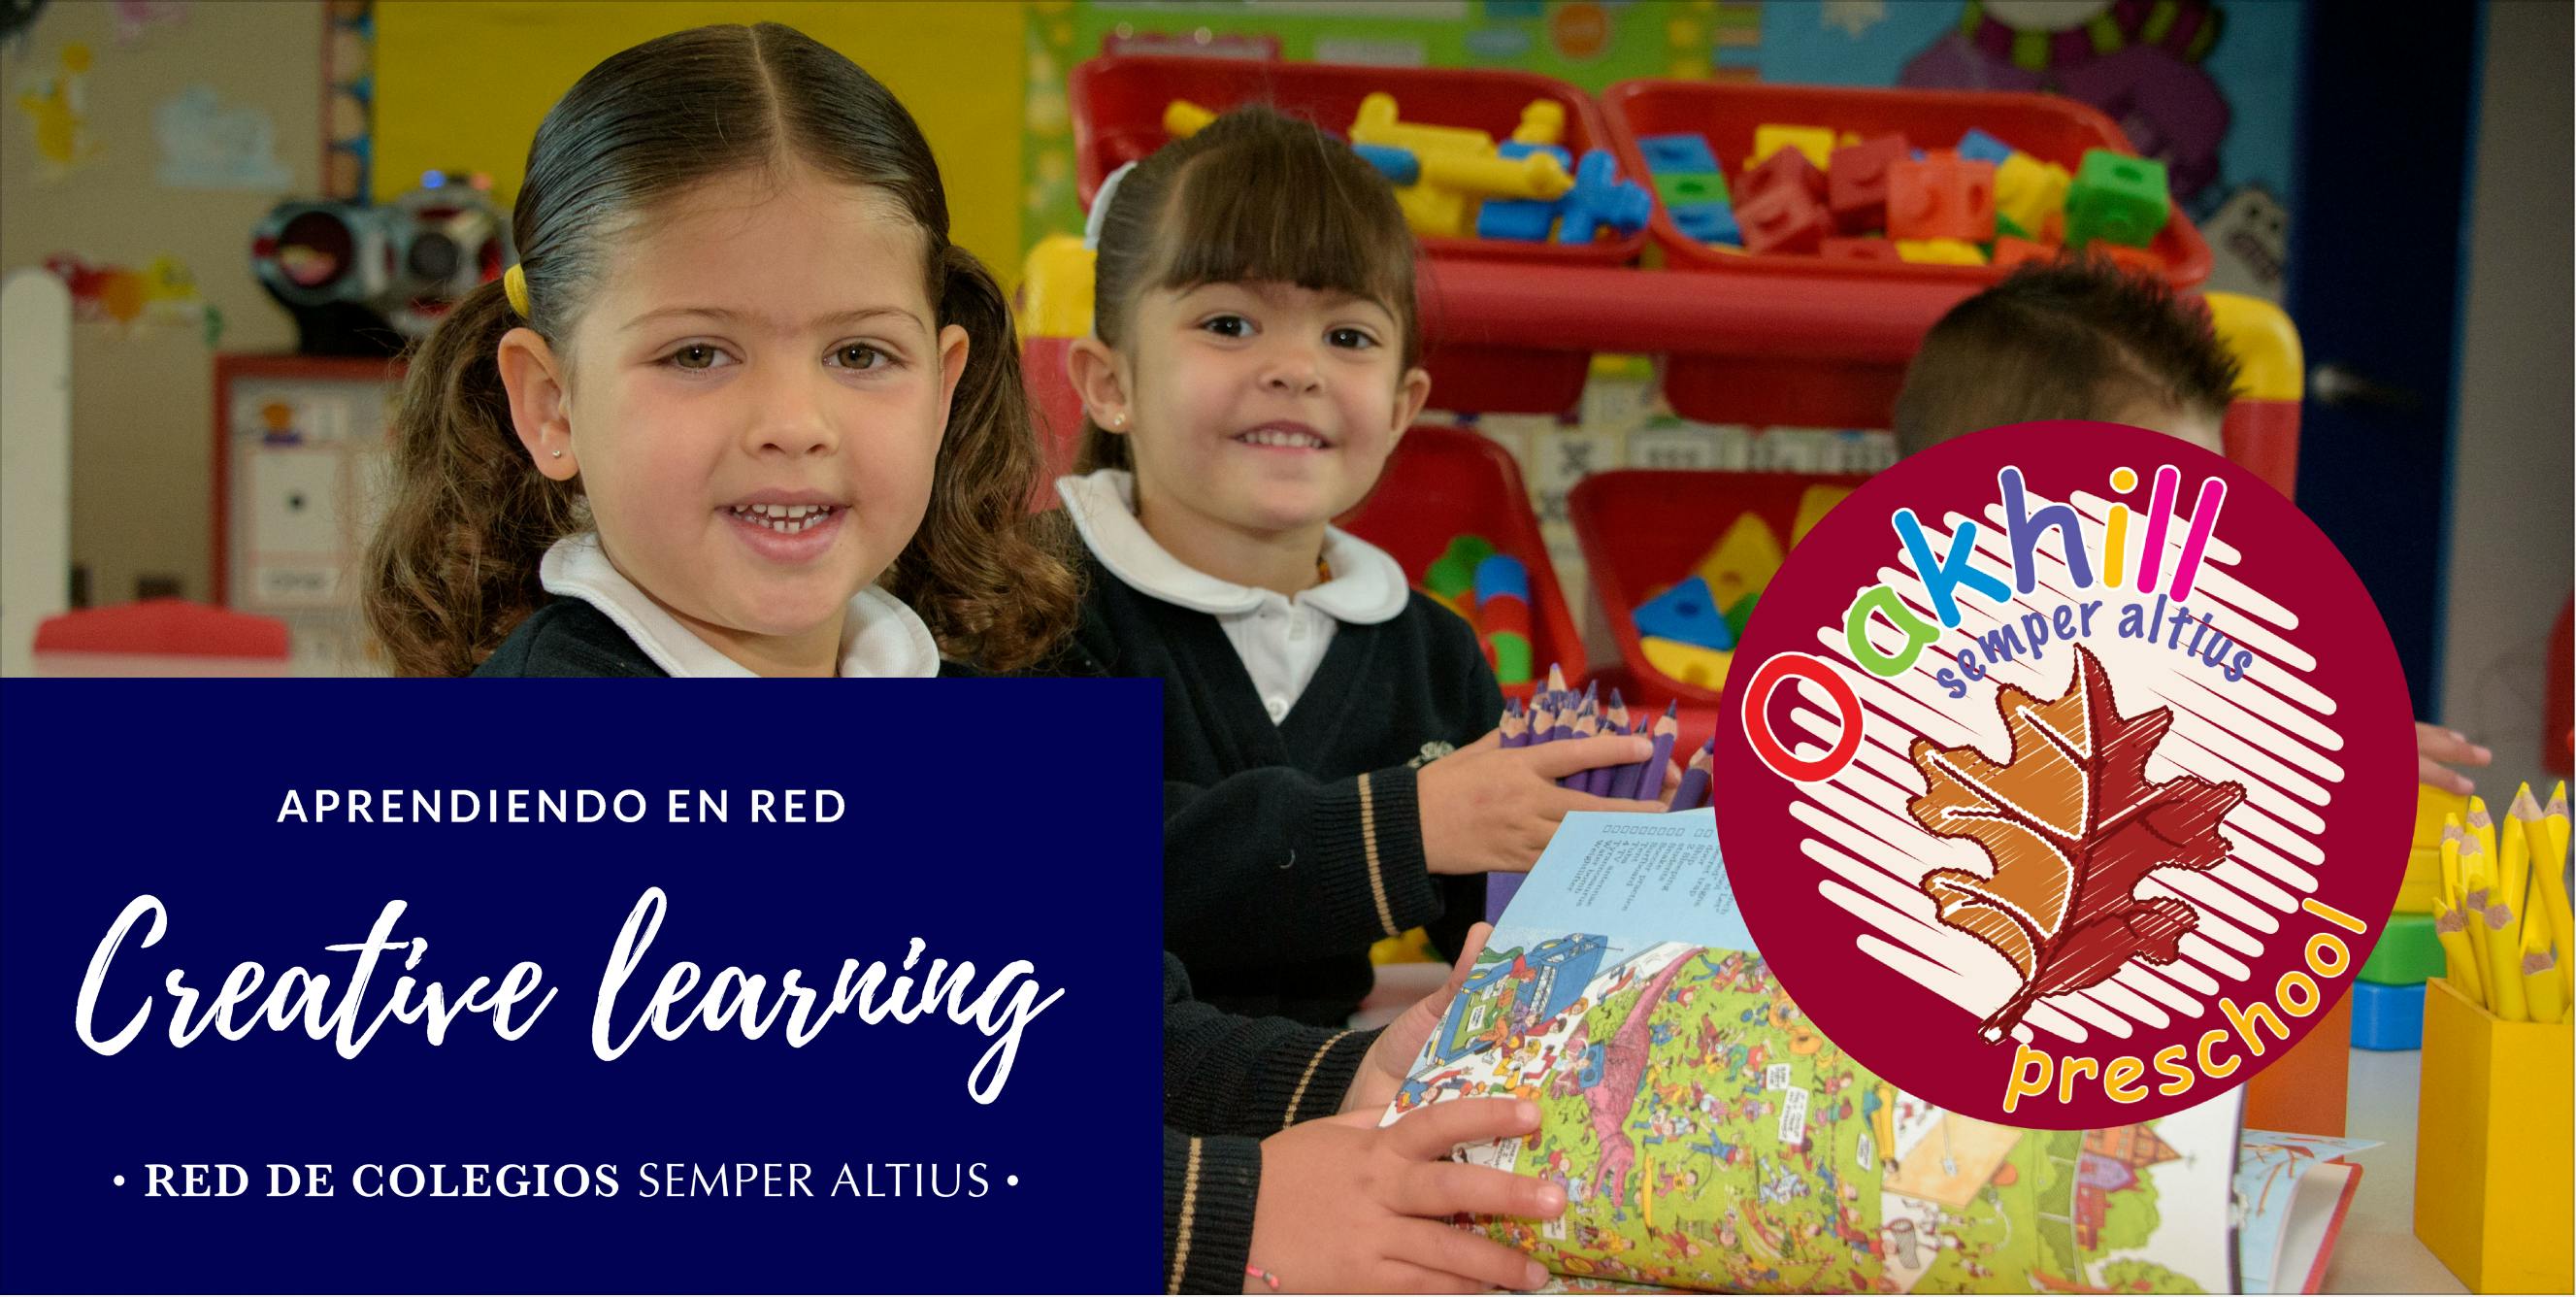 Creative learning methodology for the youngest in the classroom - Oakhill Preschool México